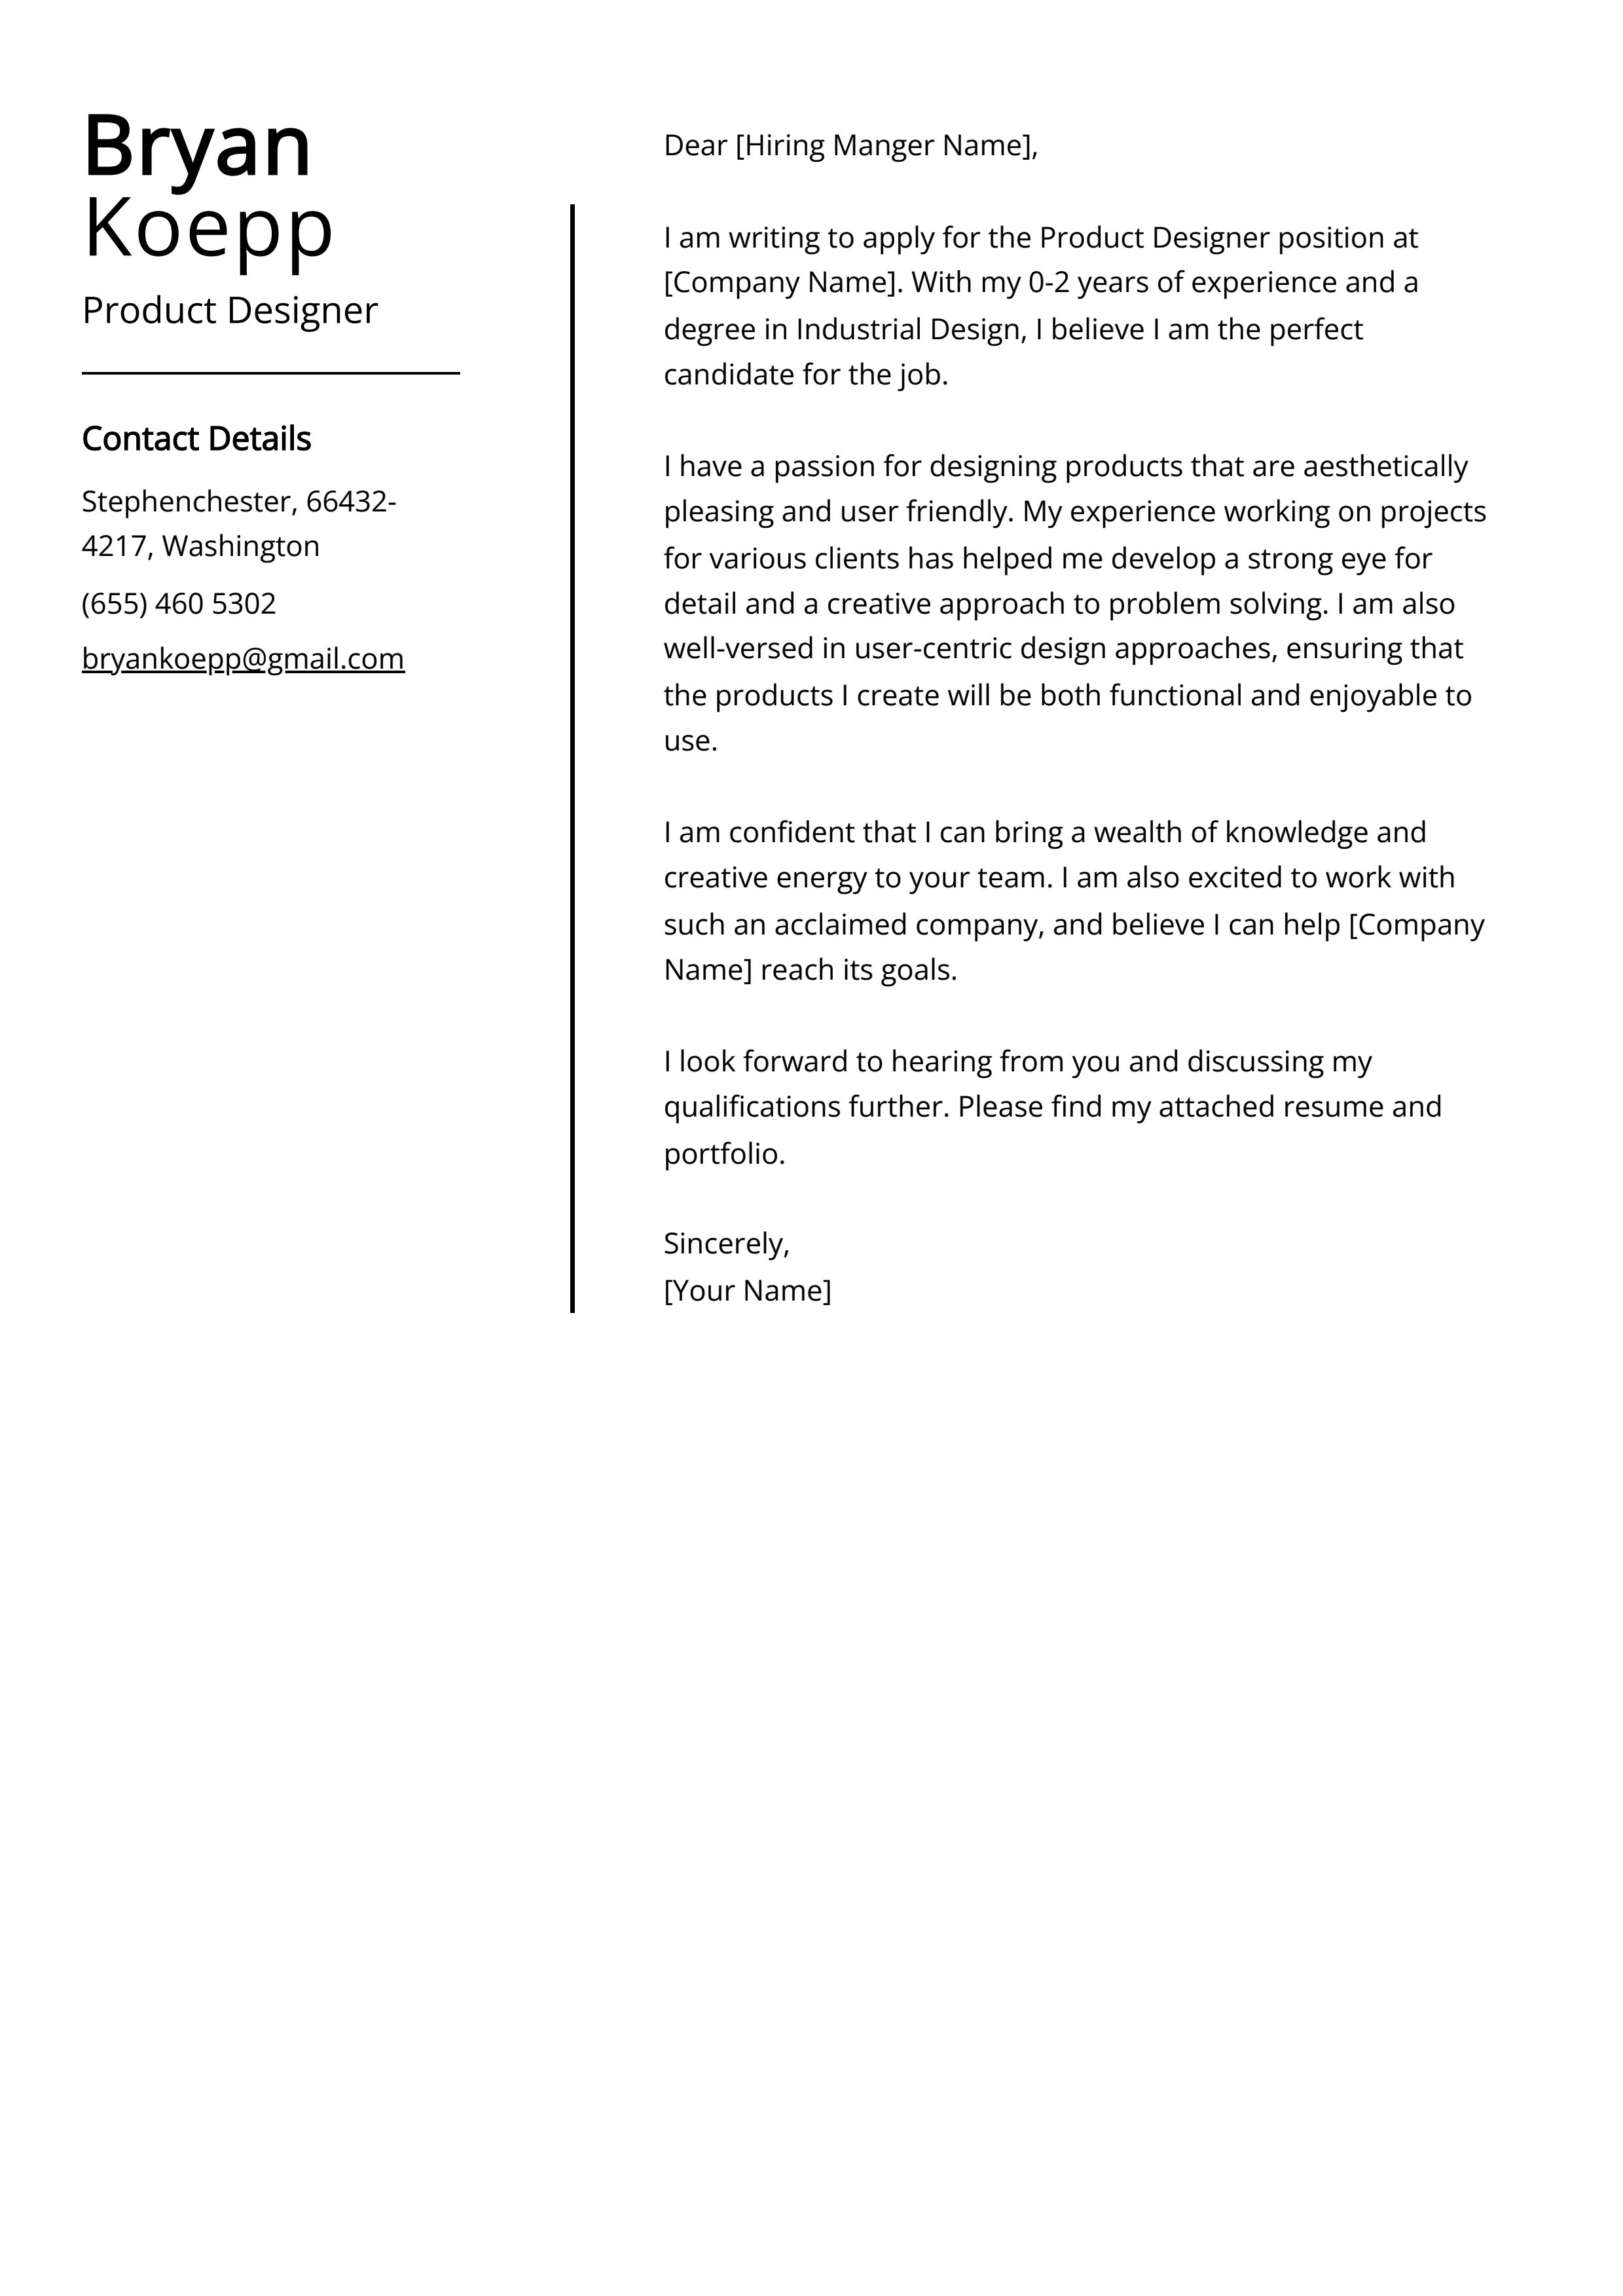 Product Designer Cover Letter Example